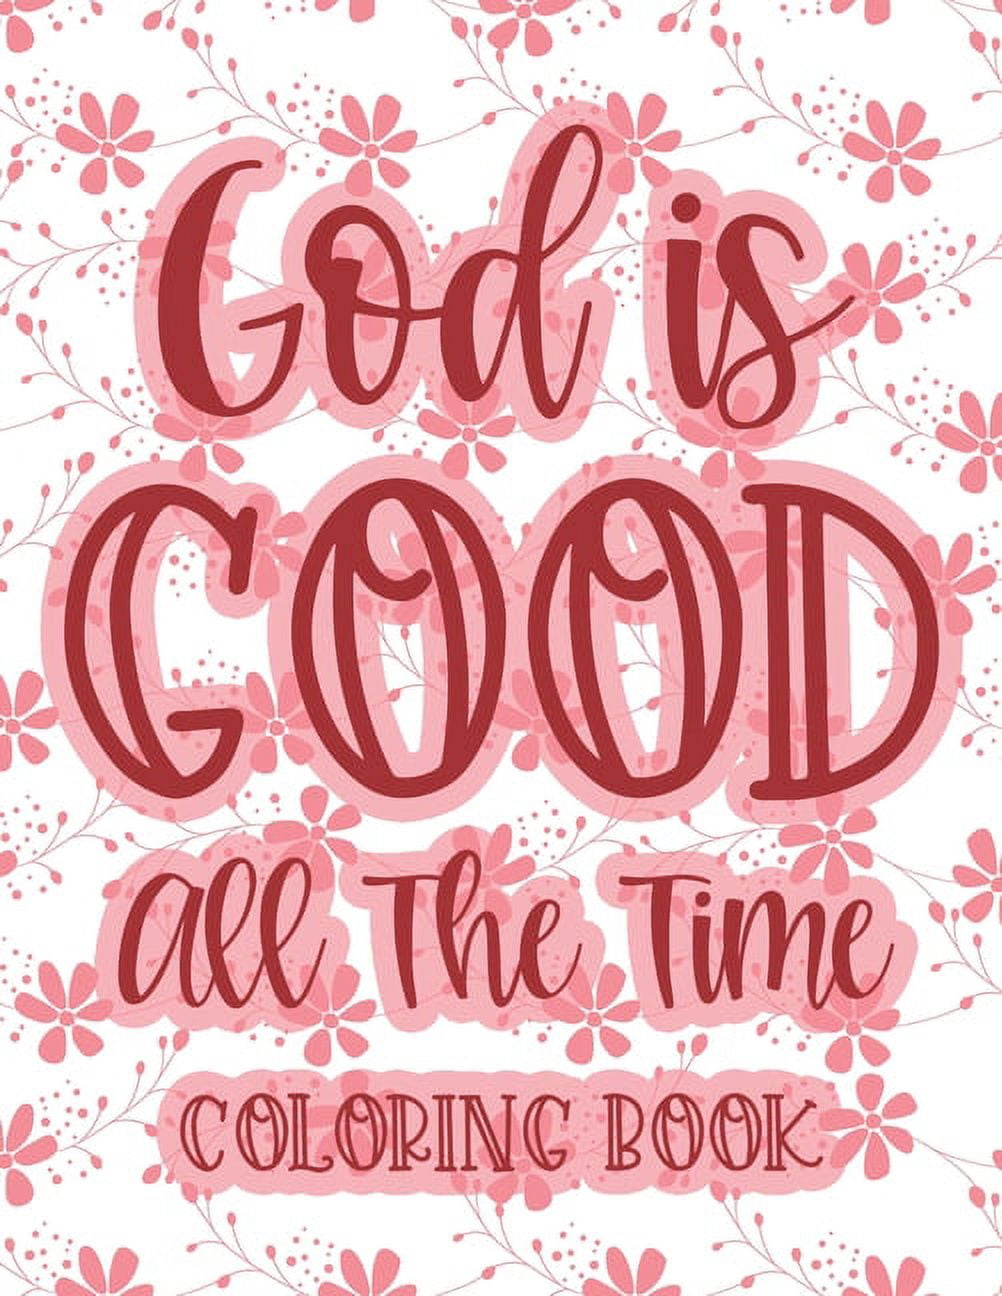 God Is Good All The Time Christian Faith Coloring Book: Devotional Coloring Book For Women, Coloring Pages With Inspirational Bible Verses To Calm The Mind and Soothe The Spirit Christian Coloring Journal [Book]